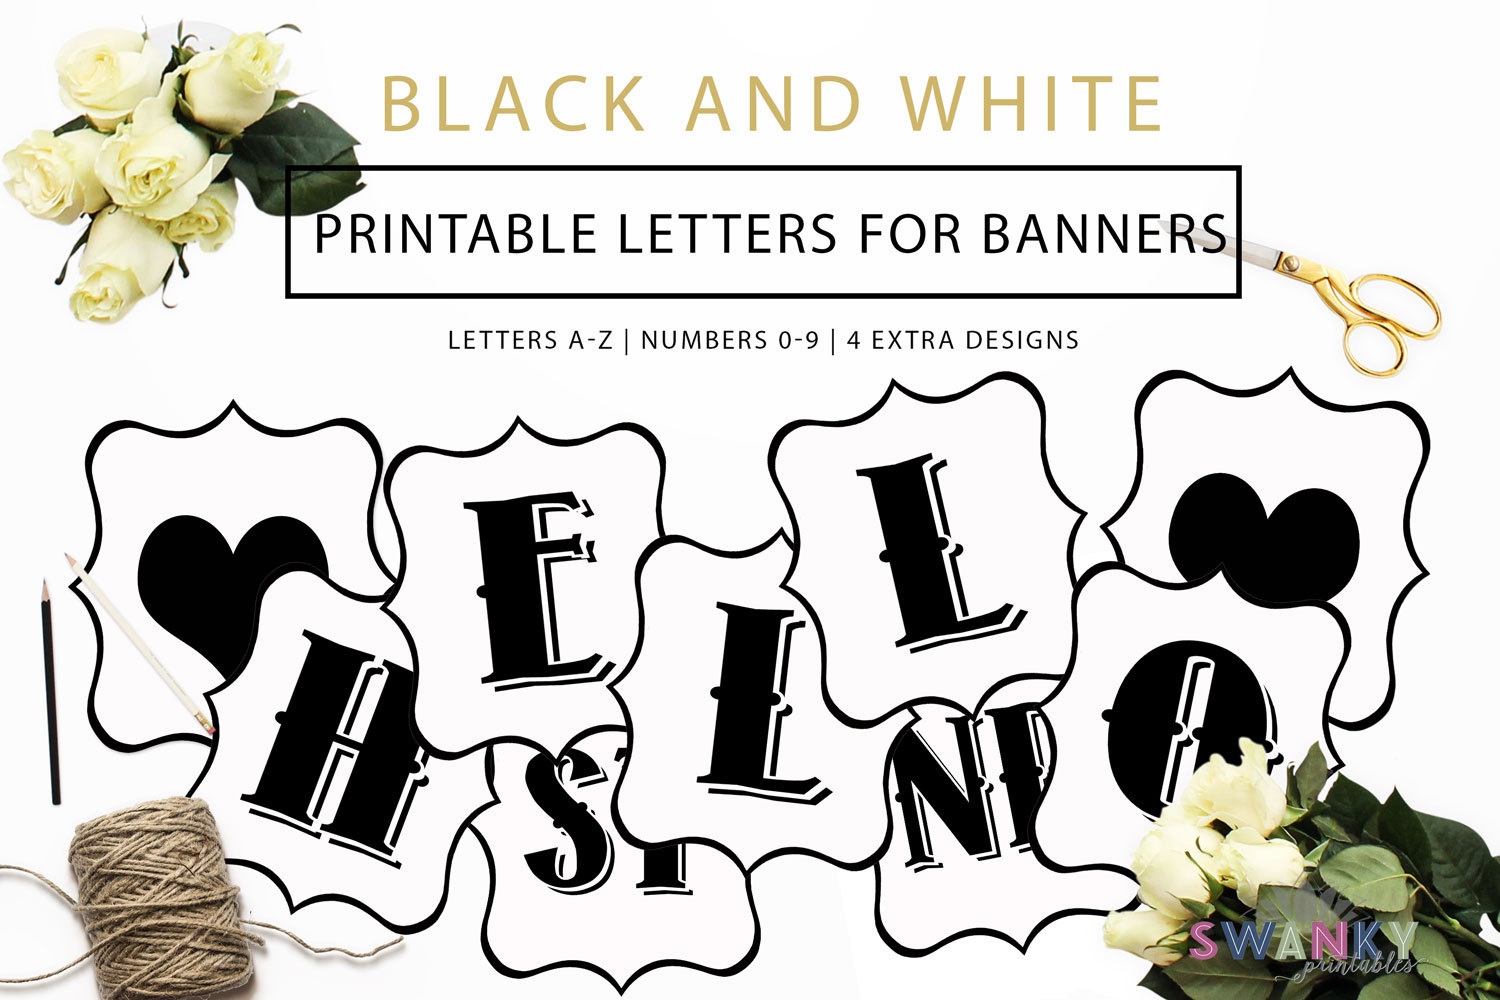 Printable Banner Letters Black And White Letters Make Your | Etsy - Diy Swank Free Printable Letters